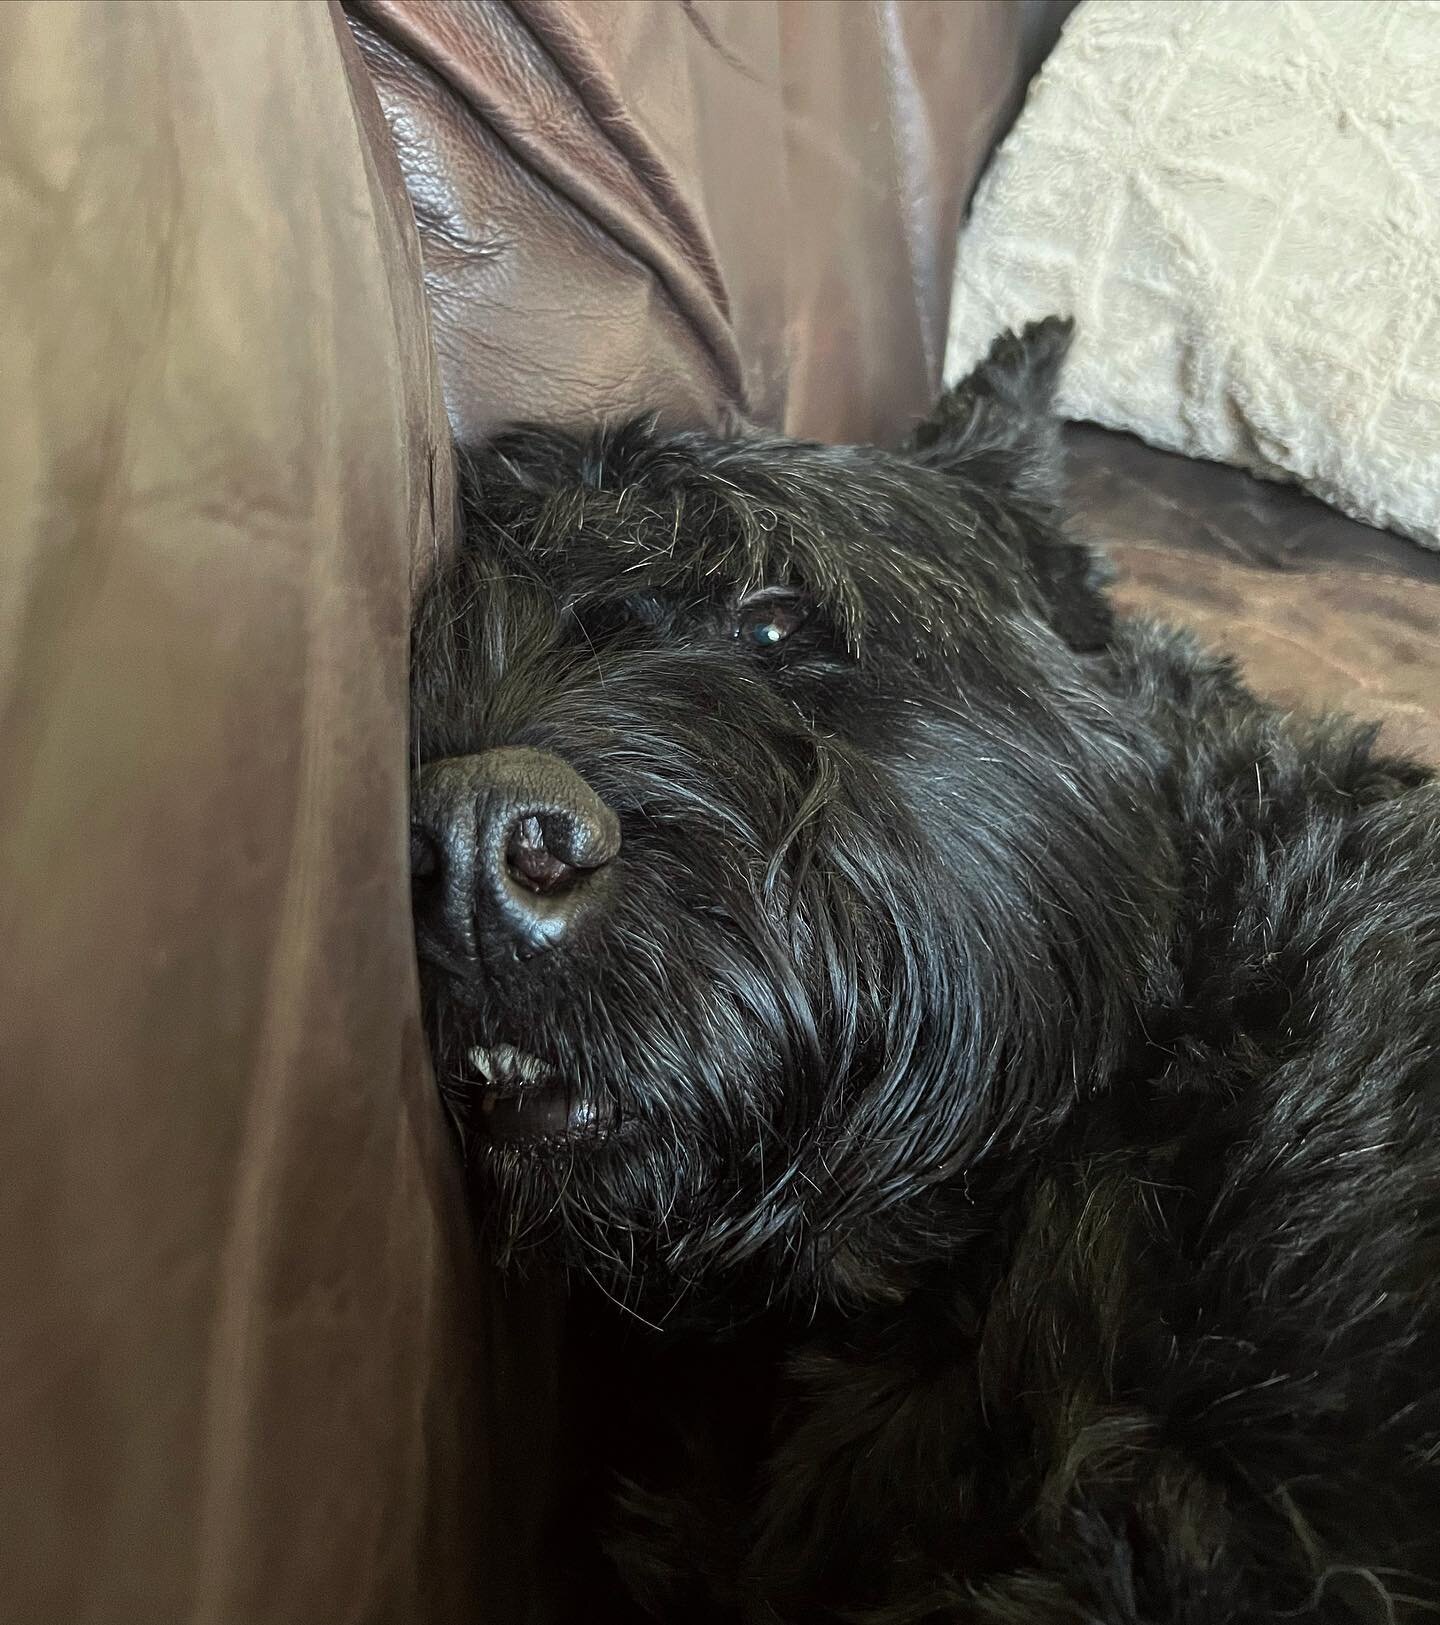 The face you make when Mom catches you napping 10 minutes after you wake up in the morning 💤 

#solothegiant #giantschnauzersofinstagram #giantschnauzer #blackdog #nap #doglife #sundaymornings #dogsofinstagram #schnauzersofinstagram